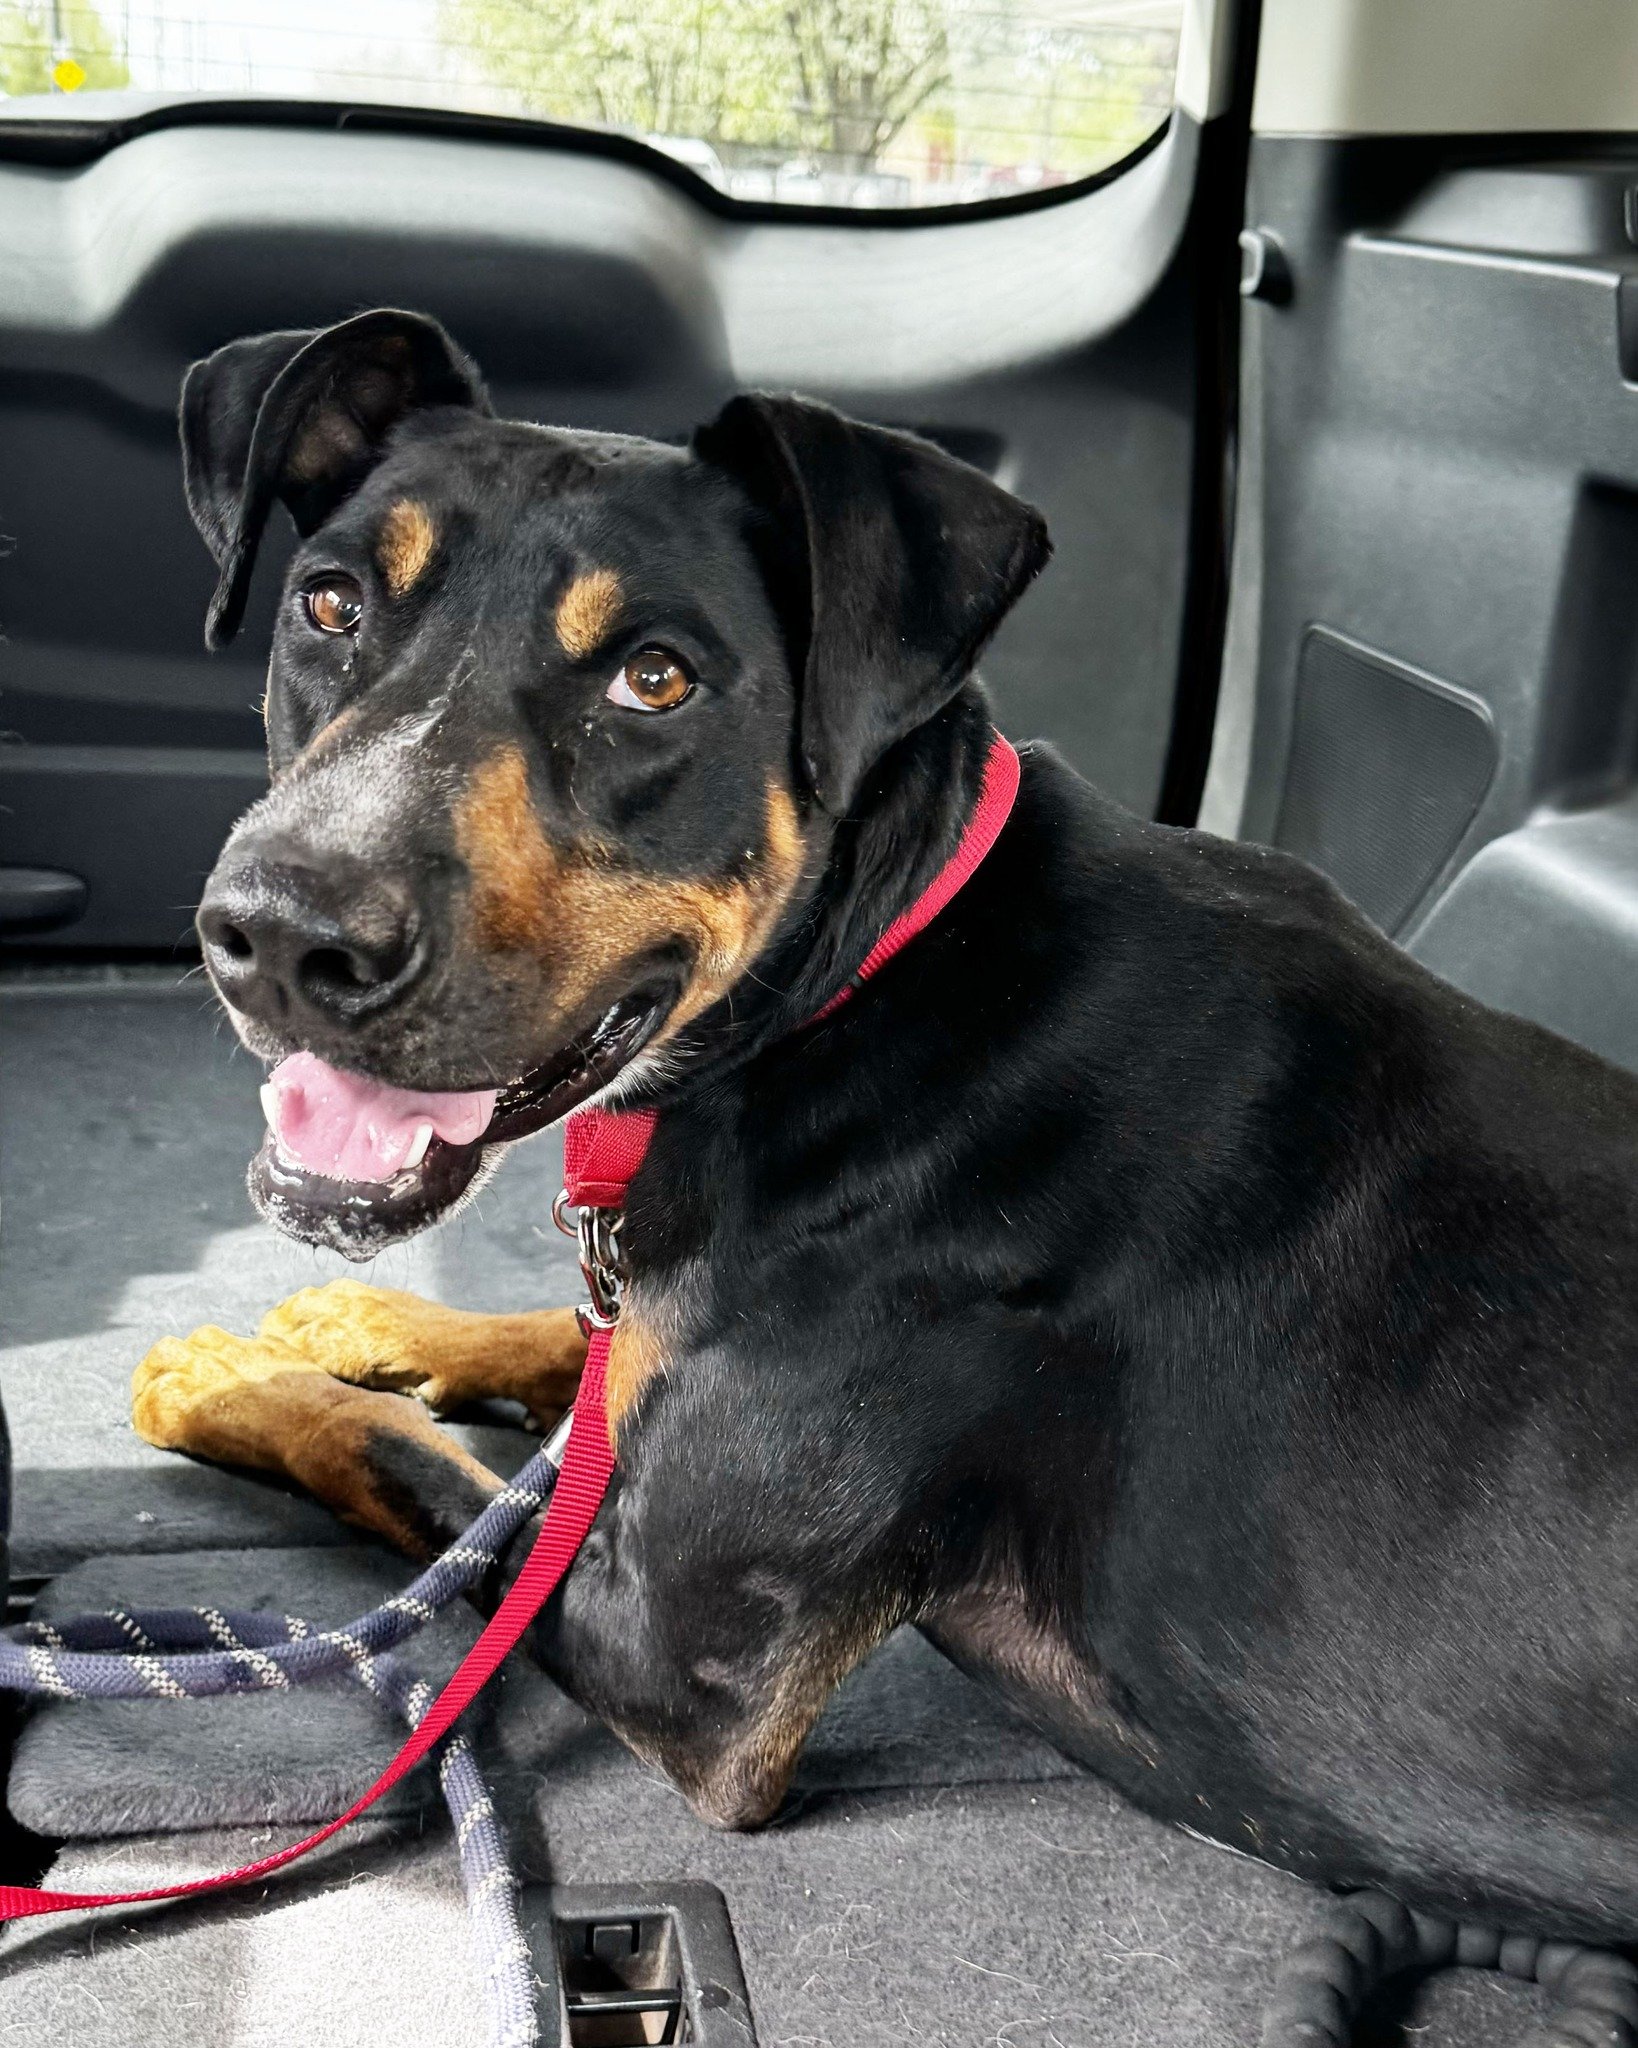 We're excited to share Luna's progress with you! Luna, one of our beloved long-stay dogs, has made a huge step with her fear of cars, marking an important moment in her path towards adoption. Animal Care Specialist Supervisor Kodee Dawald, along with